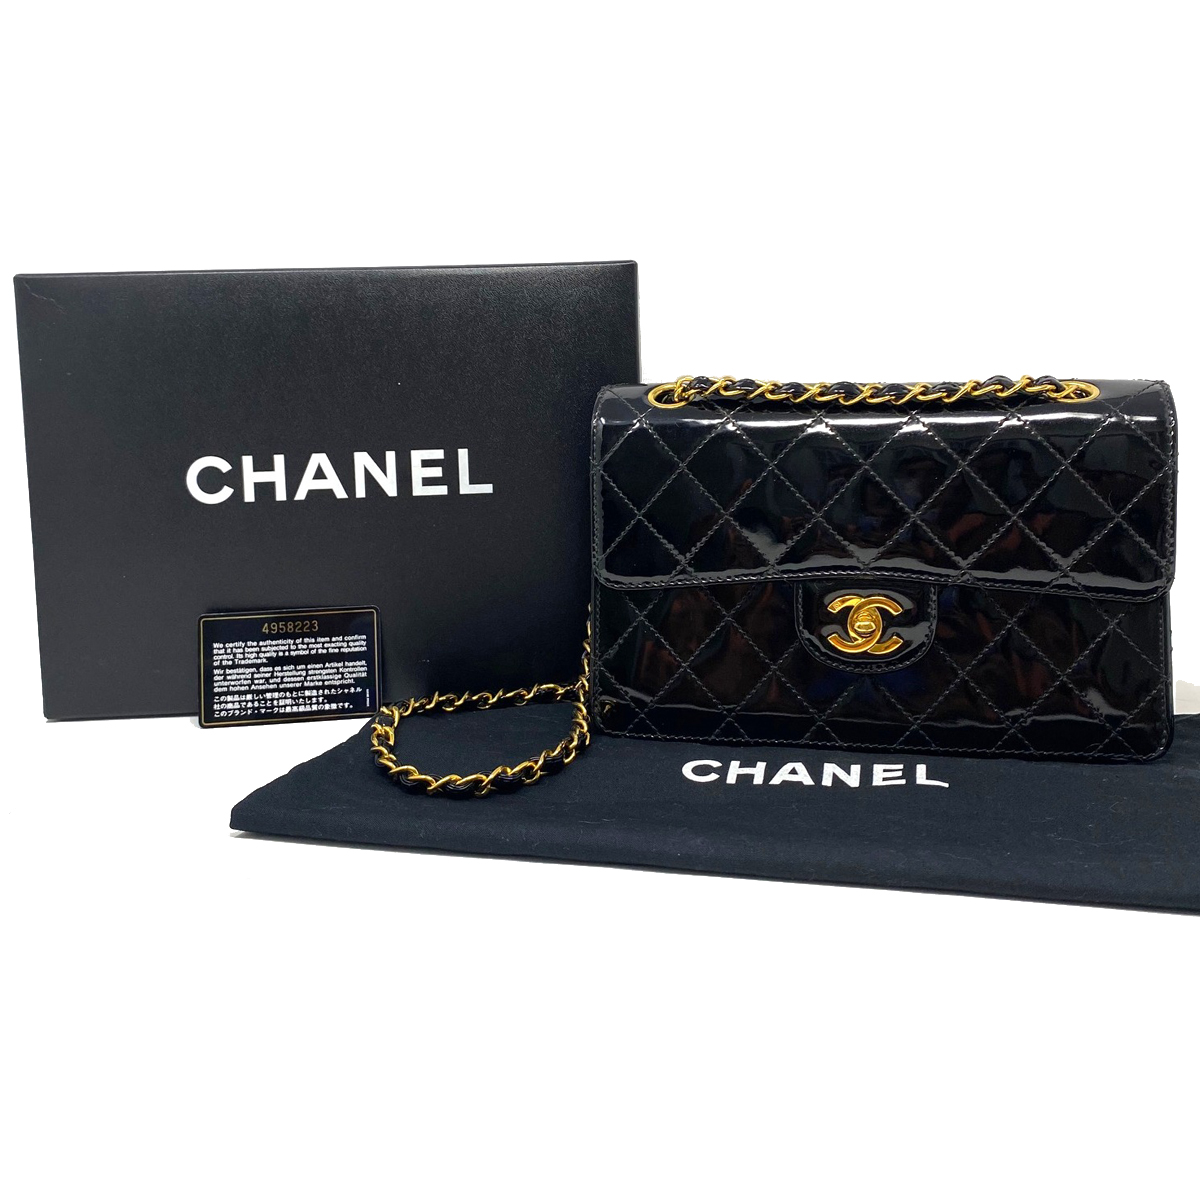 The History of The Chanel Flap Bag